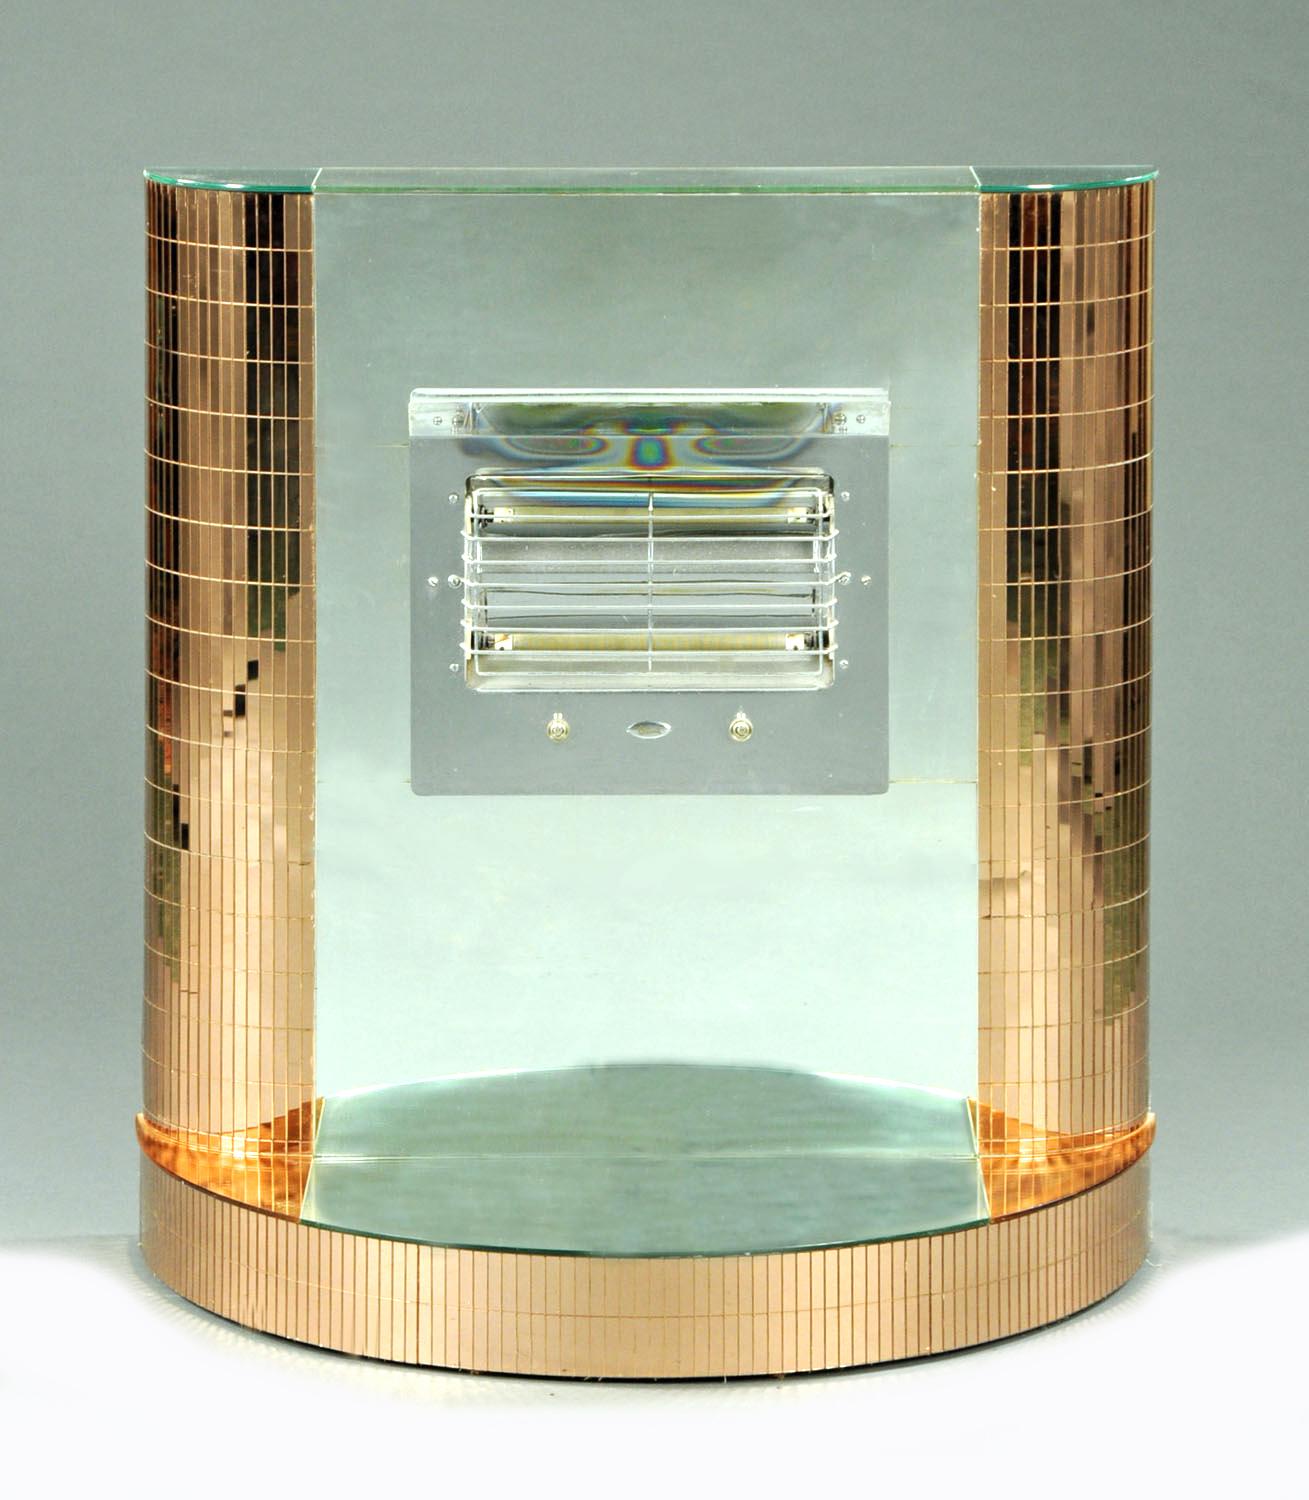 Superb Art Deco modernist fireplace, totally authentic and dating to the 1930s. For those seeking something a little different that oozes glamour and originality to the Art Deco period then this piece maybe for you. These fires really don't come